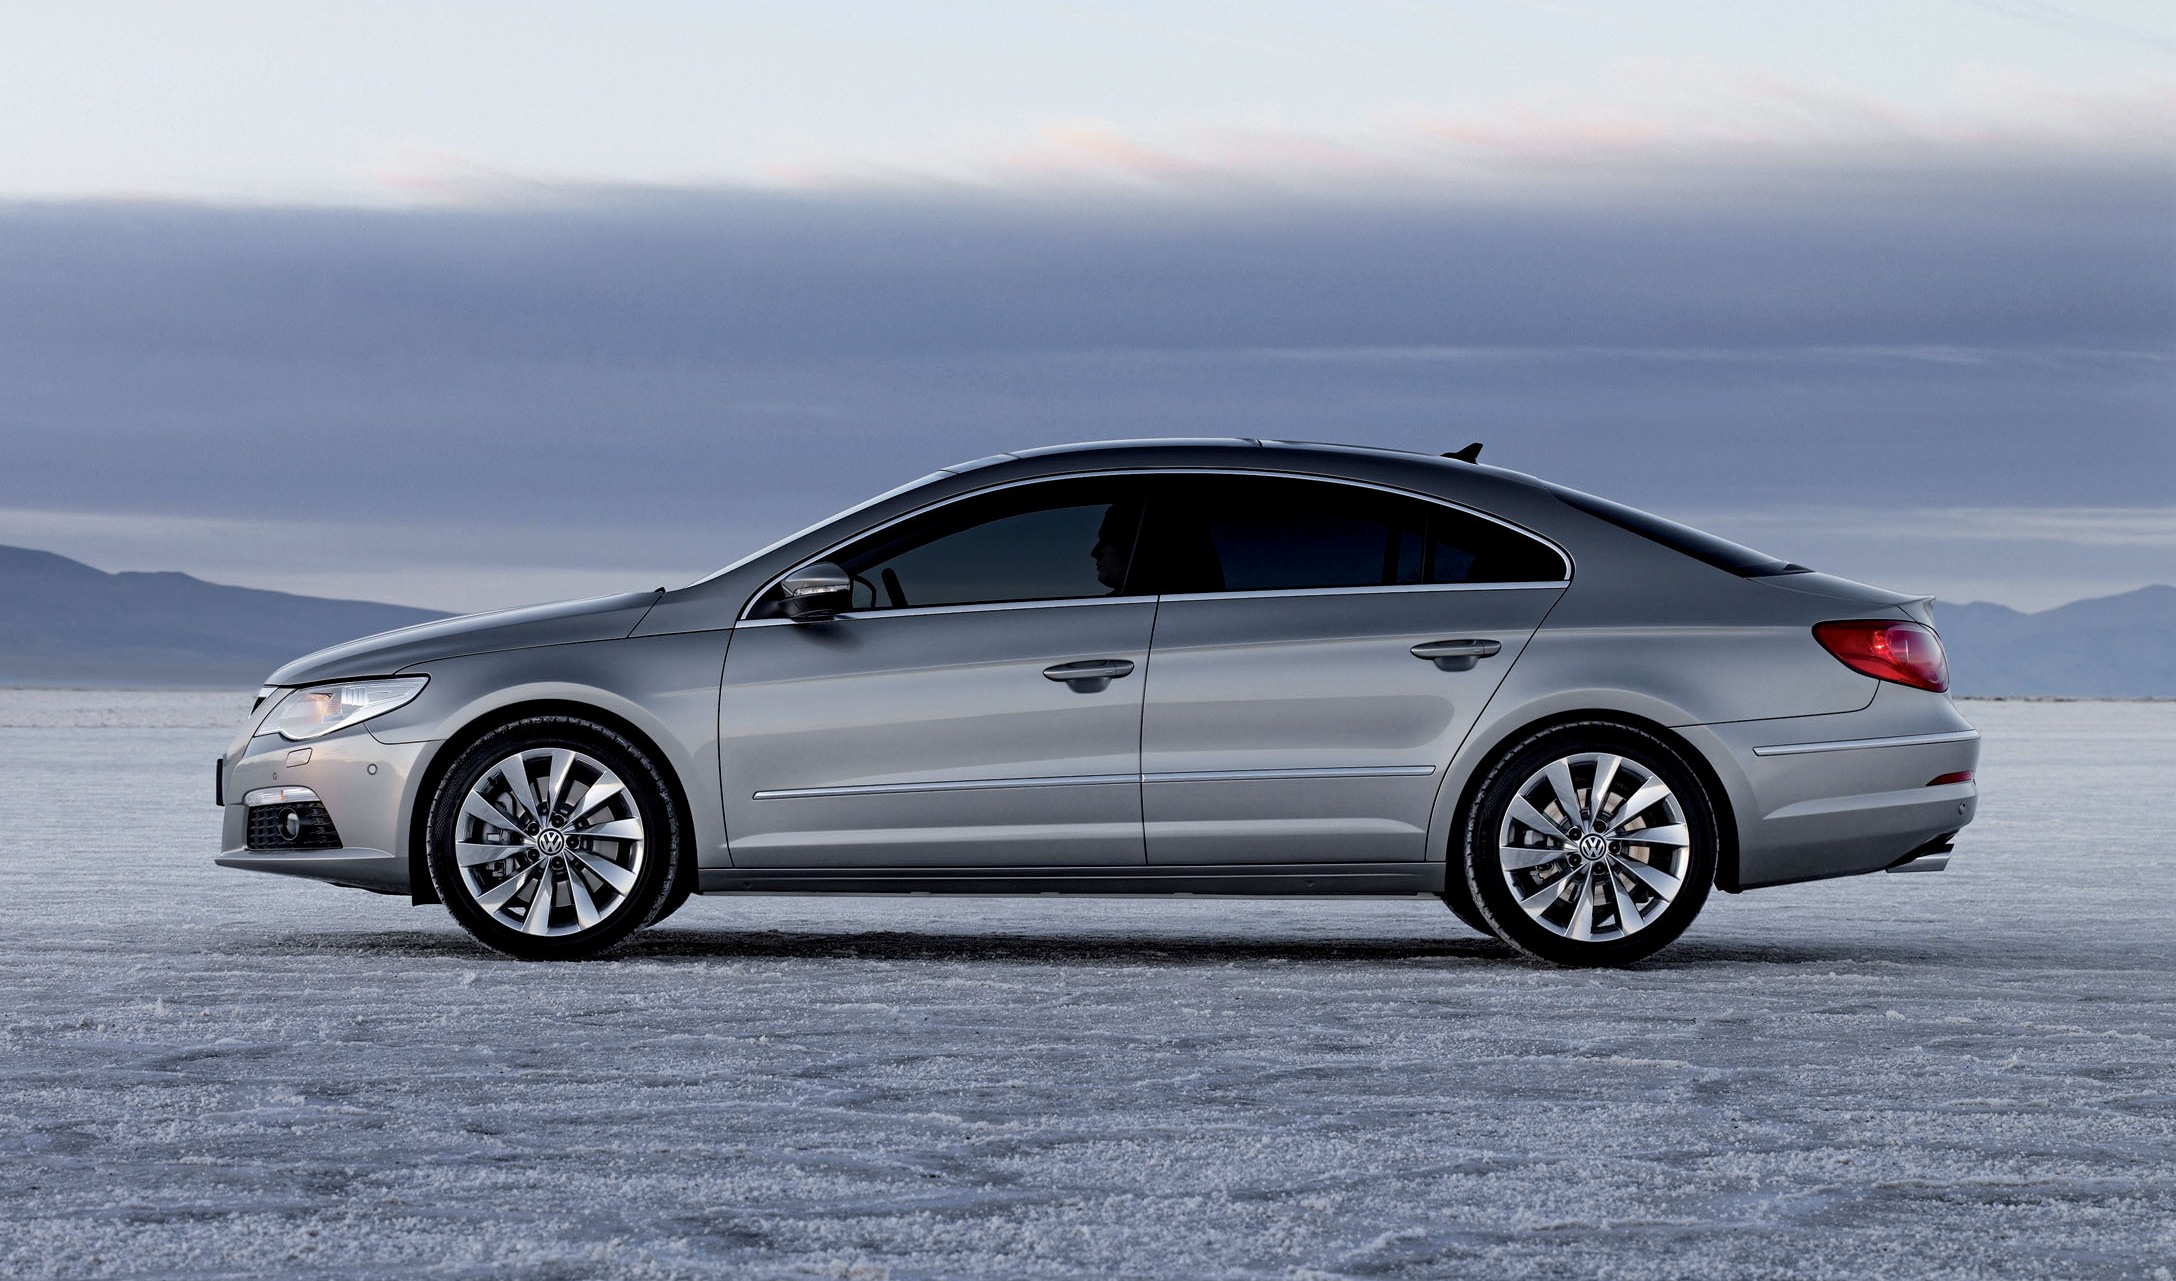 volkswagen, cars, side view, silver, silvery, 2009 volkswagen cc lock screen backgrounds